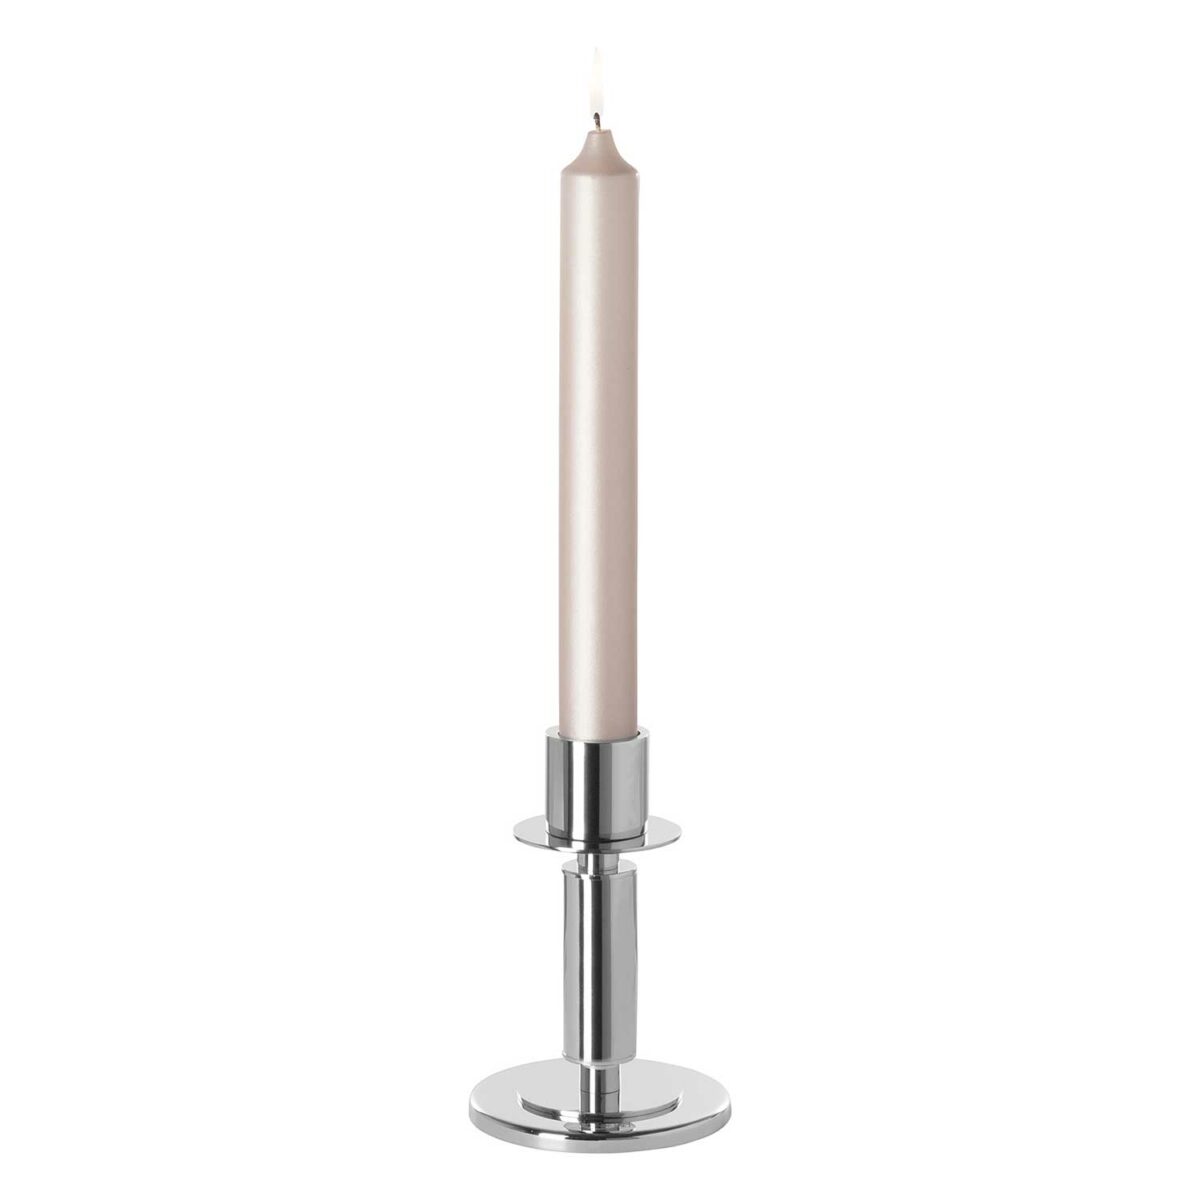 TALIS candlestick in a gift box